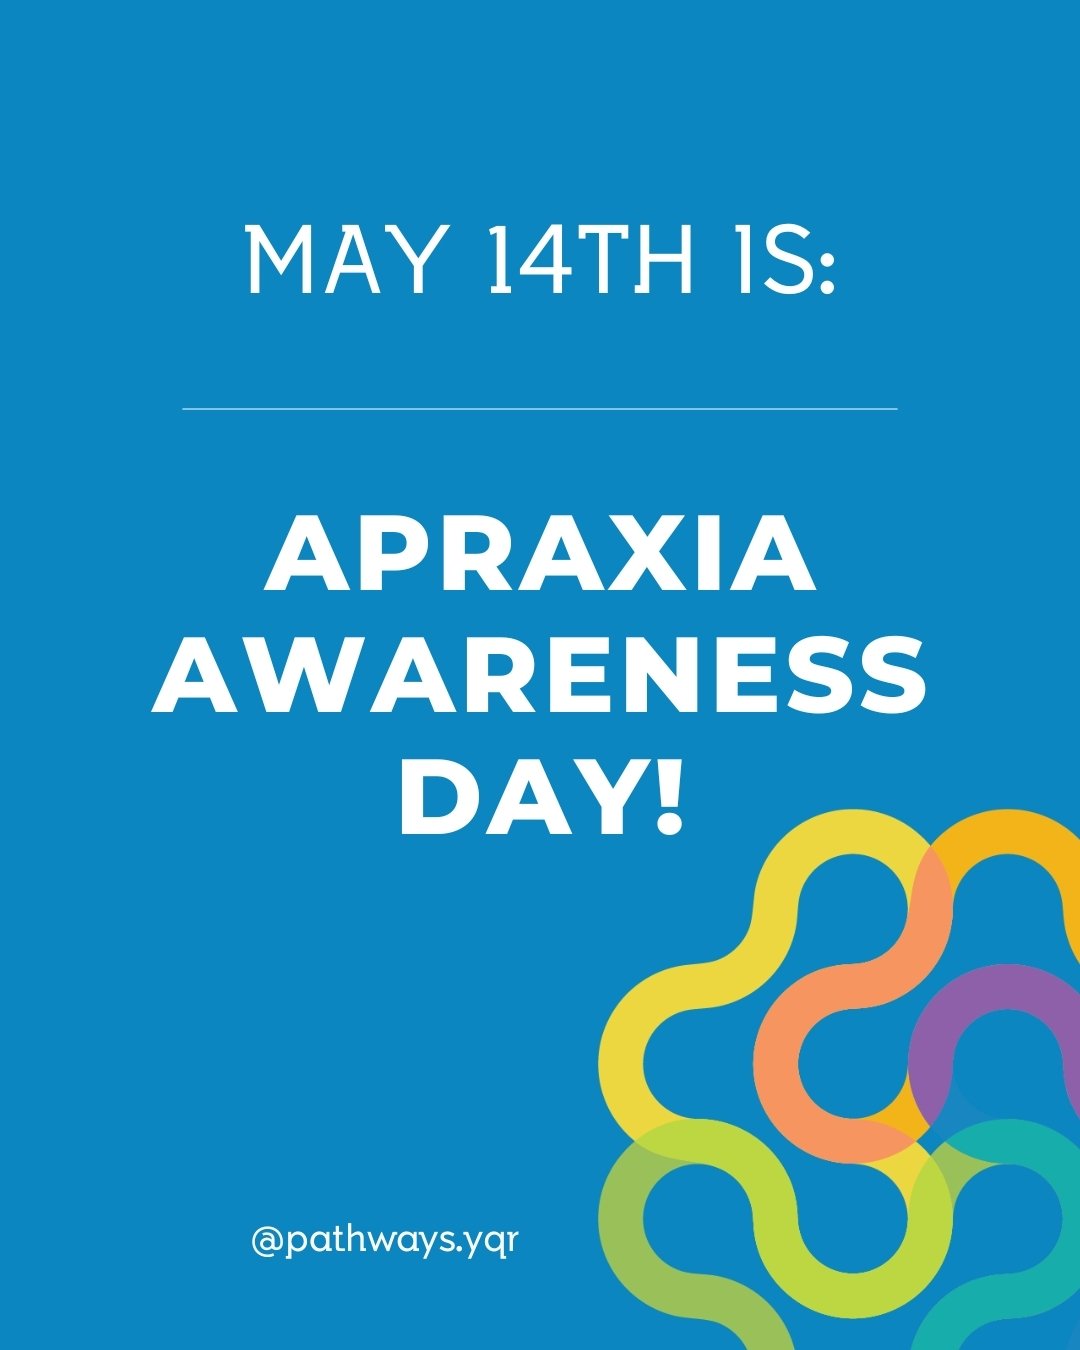 💙 🗣 Join us as we celebrate Apraxia Awareness Day. 🗣 💙

Today we share information about Childhood Apraxia of Speech (CAS) in an effort to spread understanding and support for apraxia. &gt;&gt;&gt;&gt; SWIPE to learn about CAS. 🫶

We celebrate r